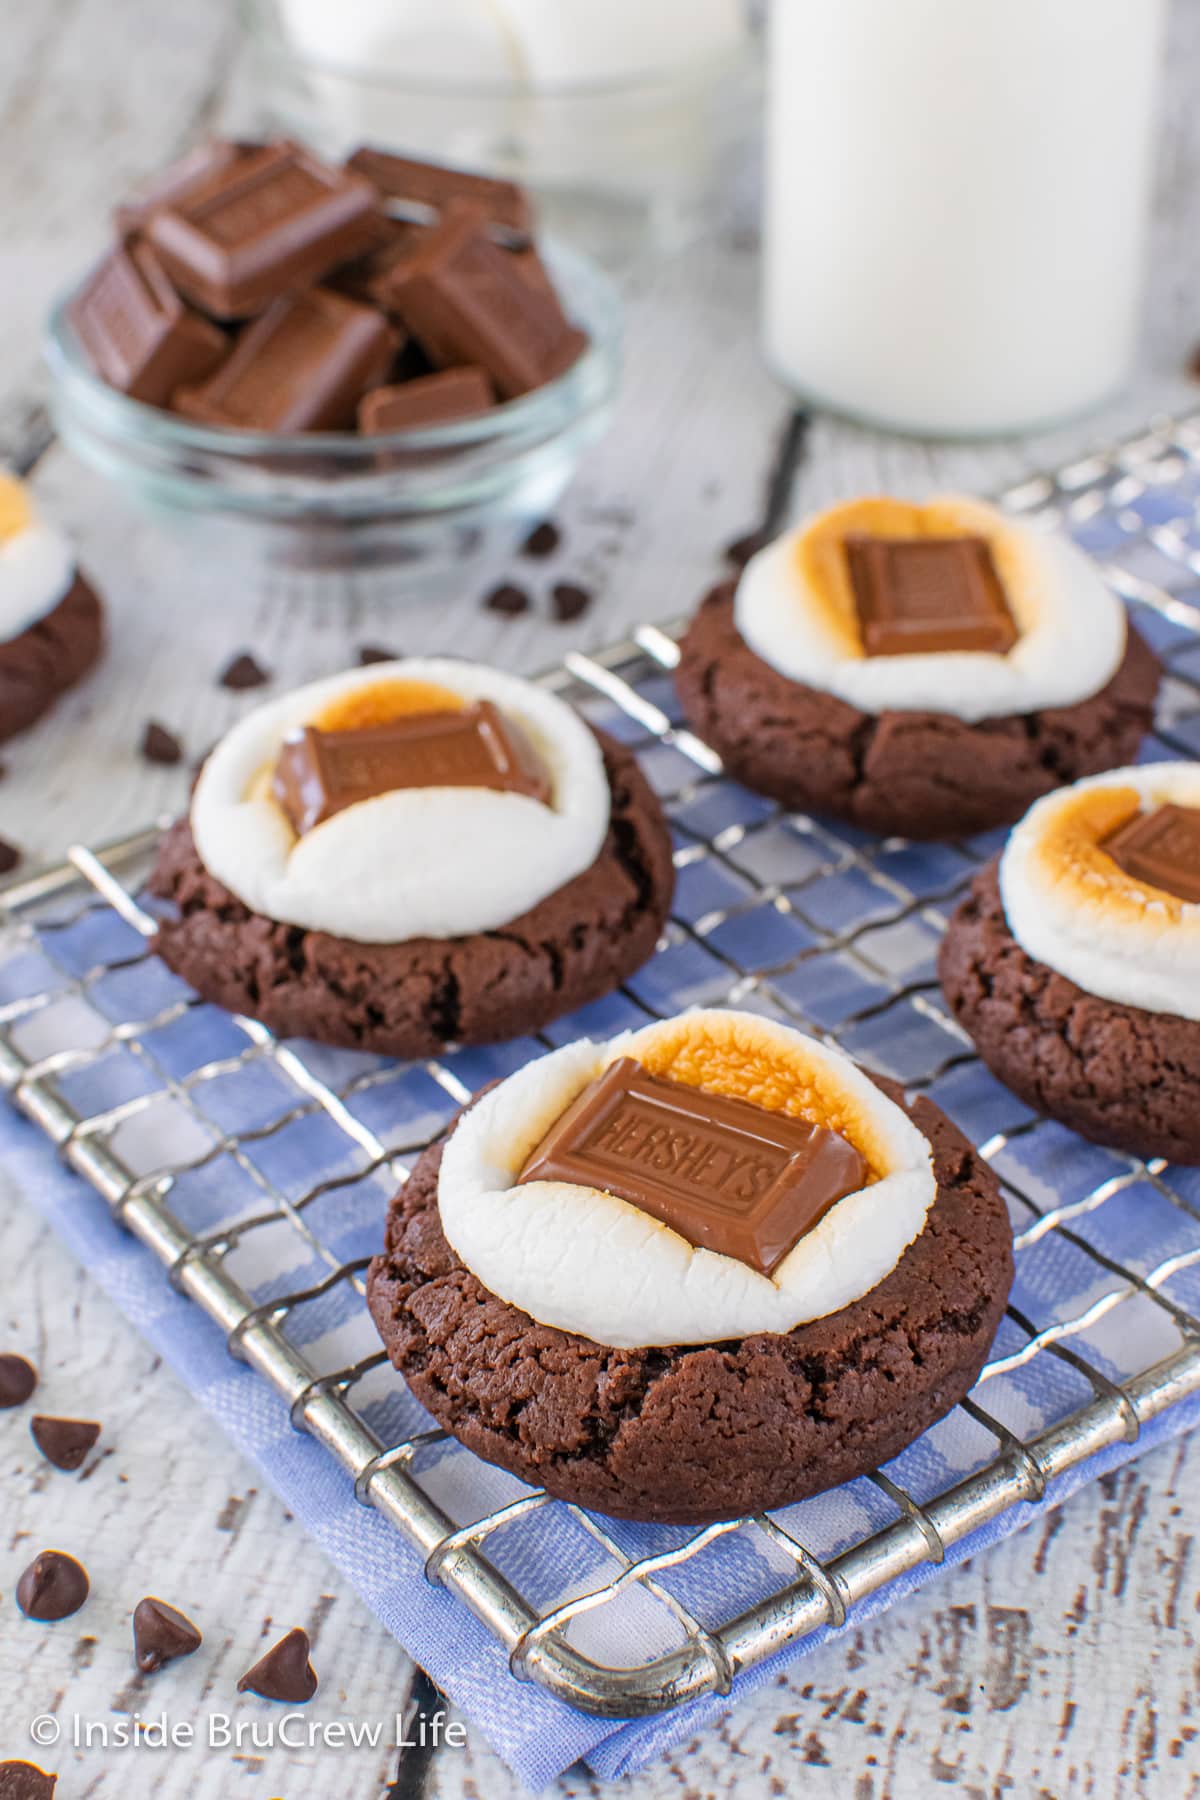 Chocolate cookies topped with toasted marshmallows and candy bars.